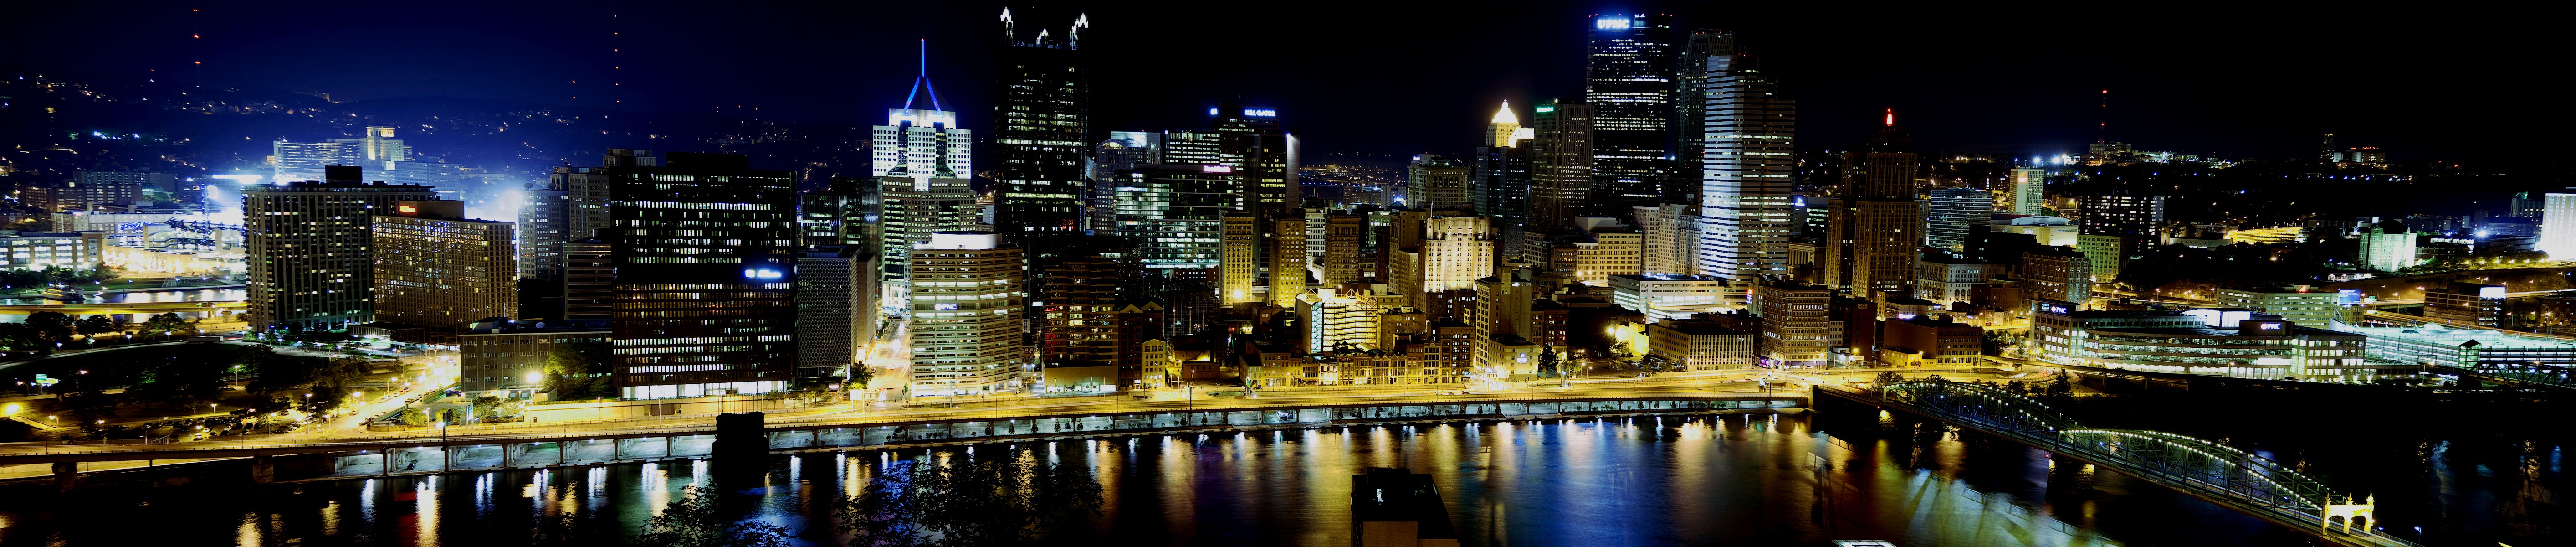 General 5655x1200 city night multiple display Pittsburgh USA cityscape city lights low light